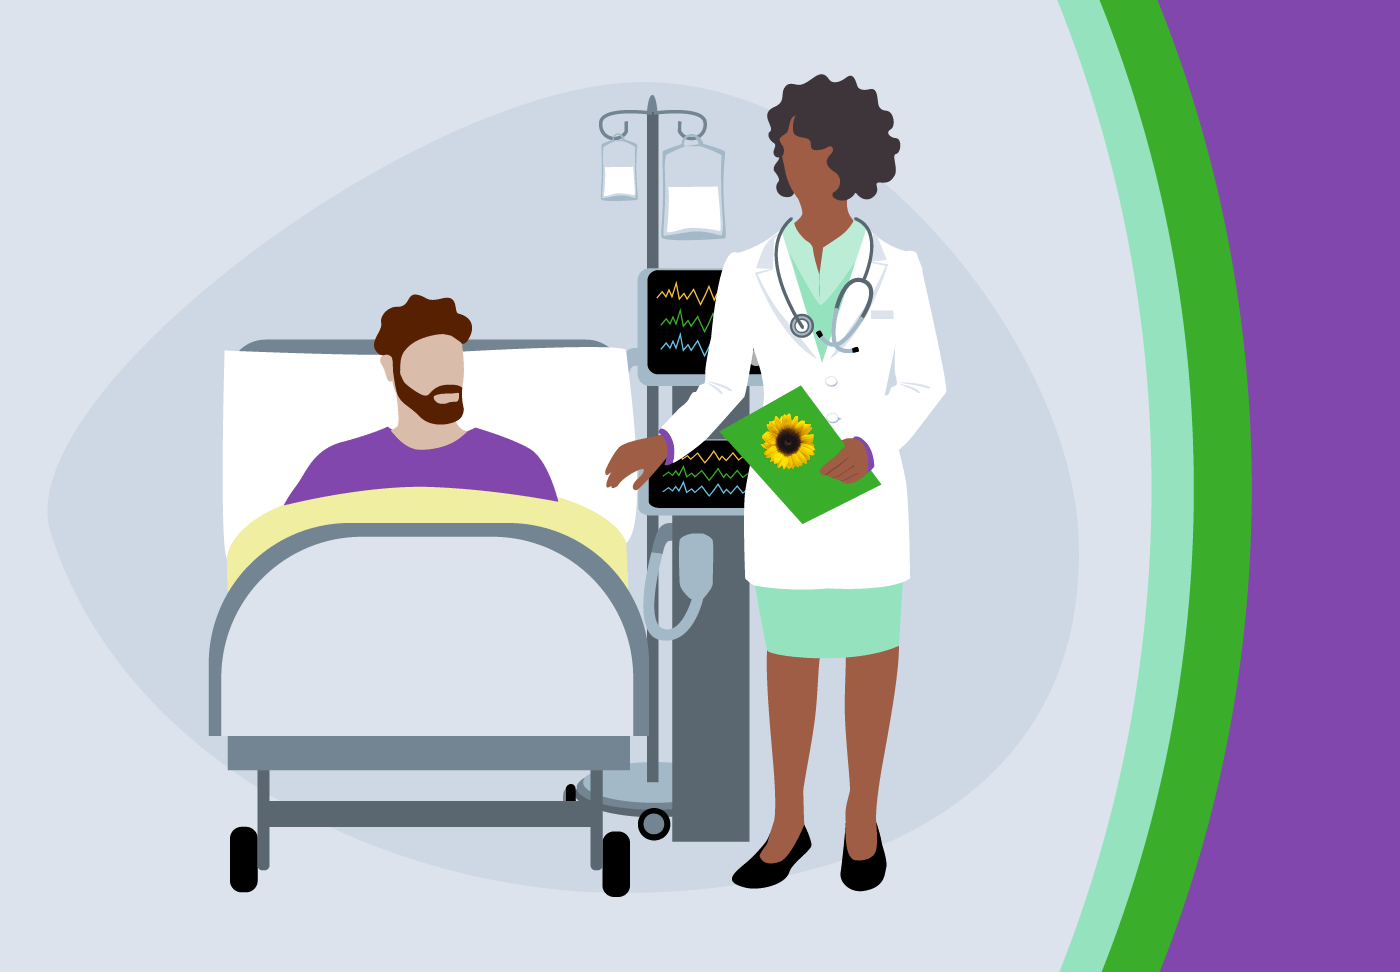 Illustration of provider speaking with patient. Provider holding green card with sunflower logo.